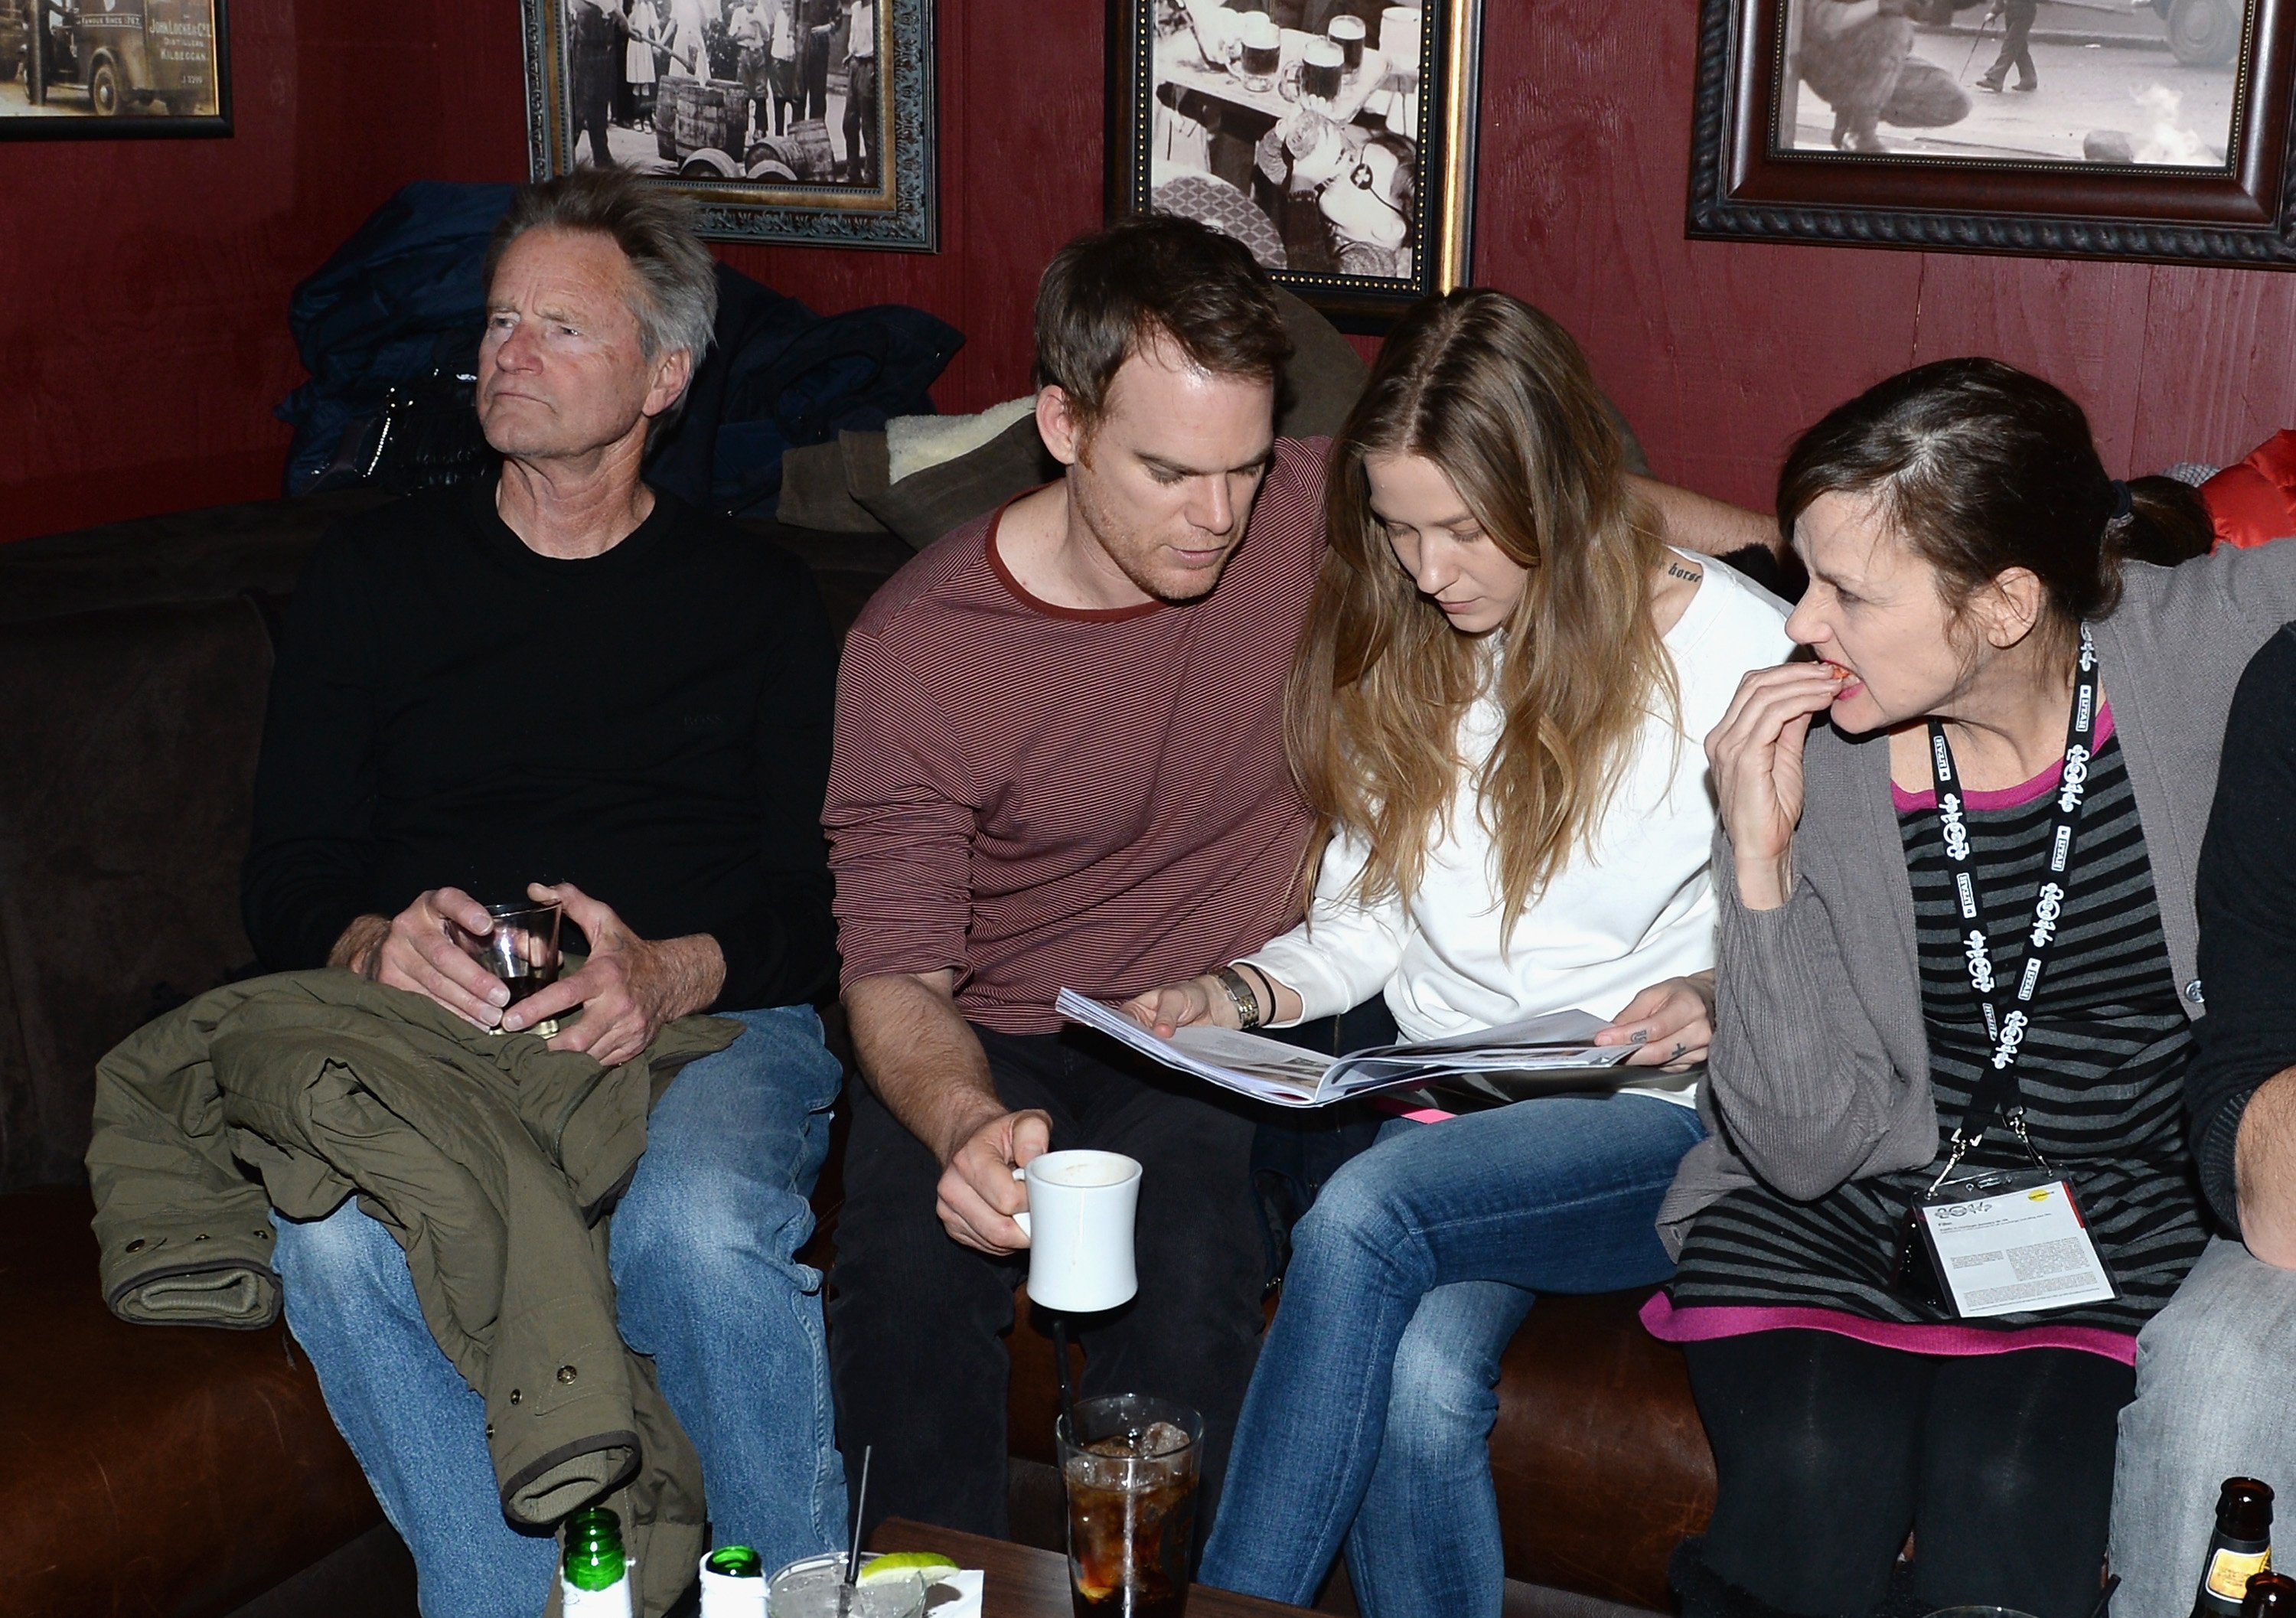 Michael C. Hall and Morgan McGregor (center) are photographed at the Brownie Brittle and Prefunc NFL playoff party at Rock & Reilly's on January 19, 2014 in Park City | Source: Getty Images